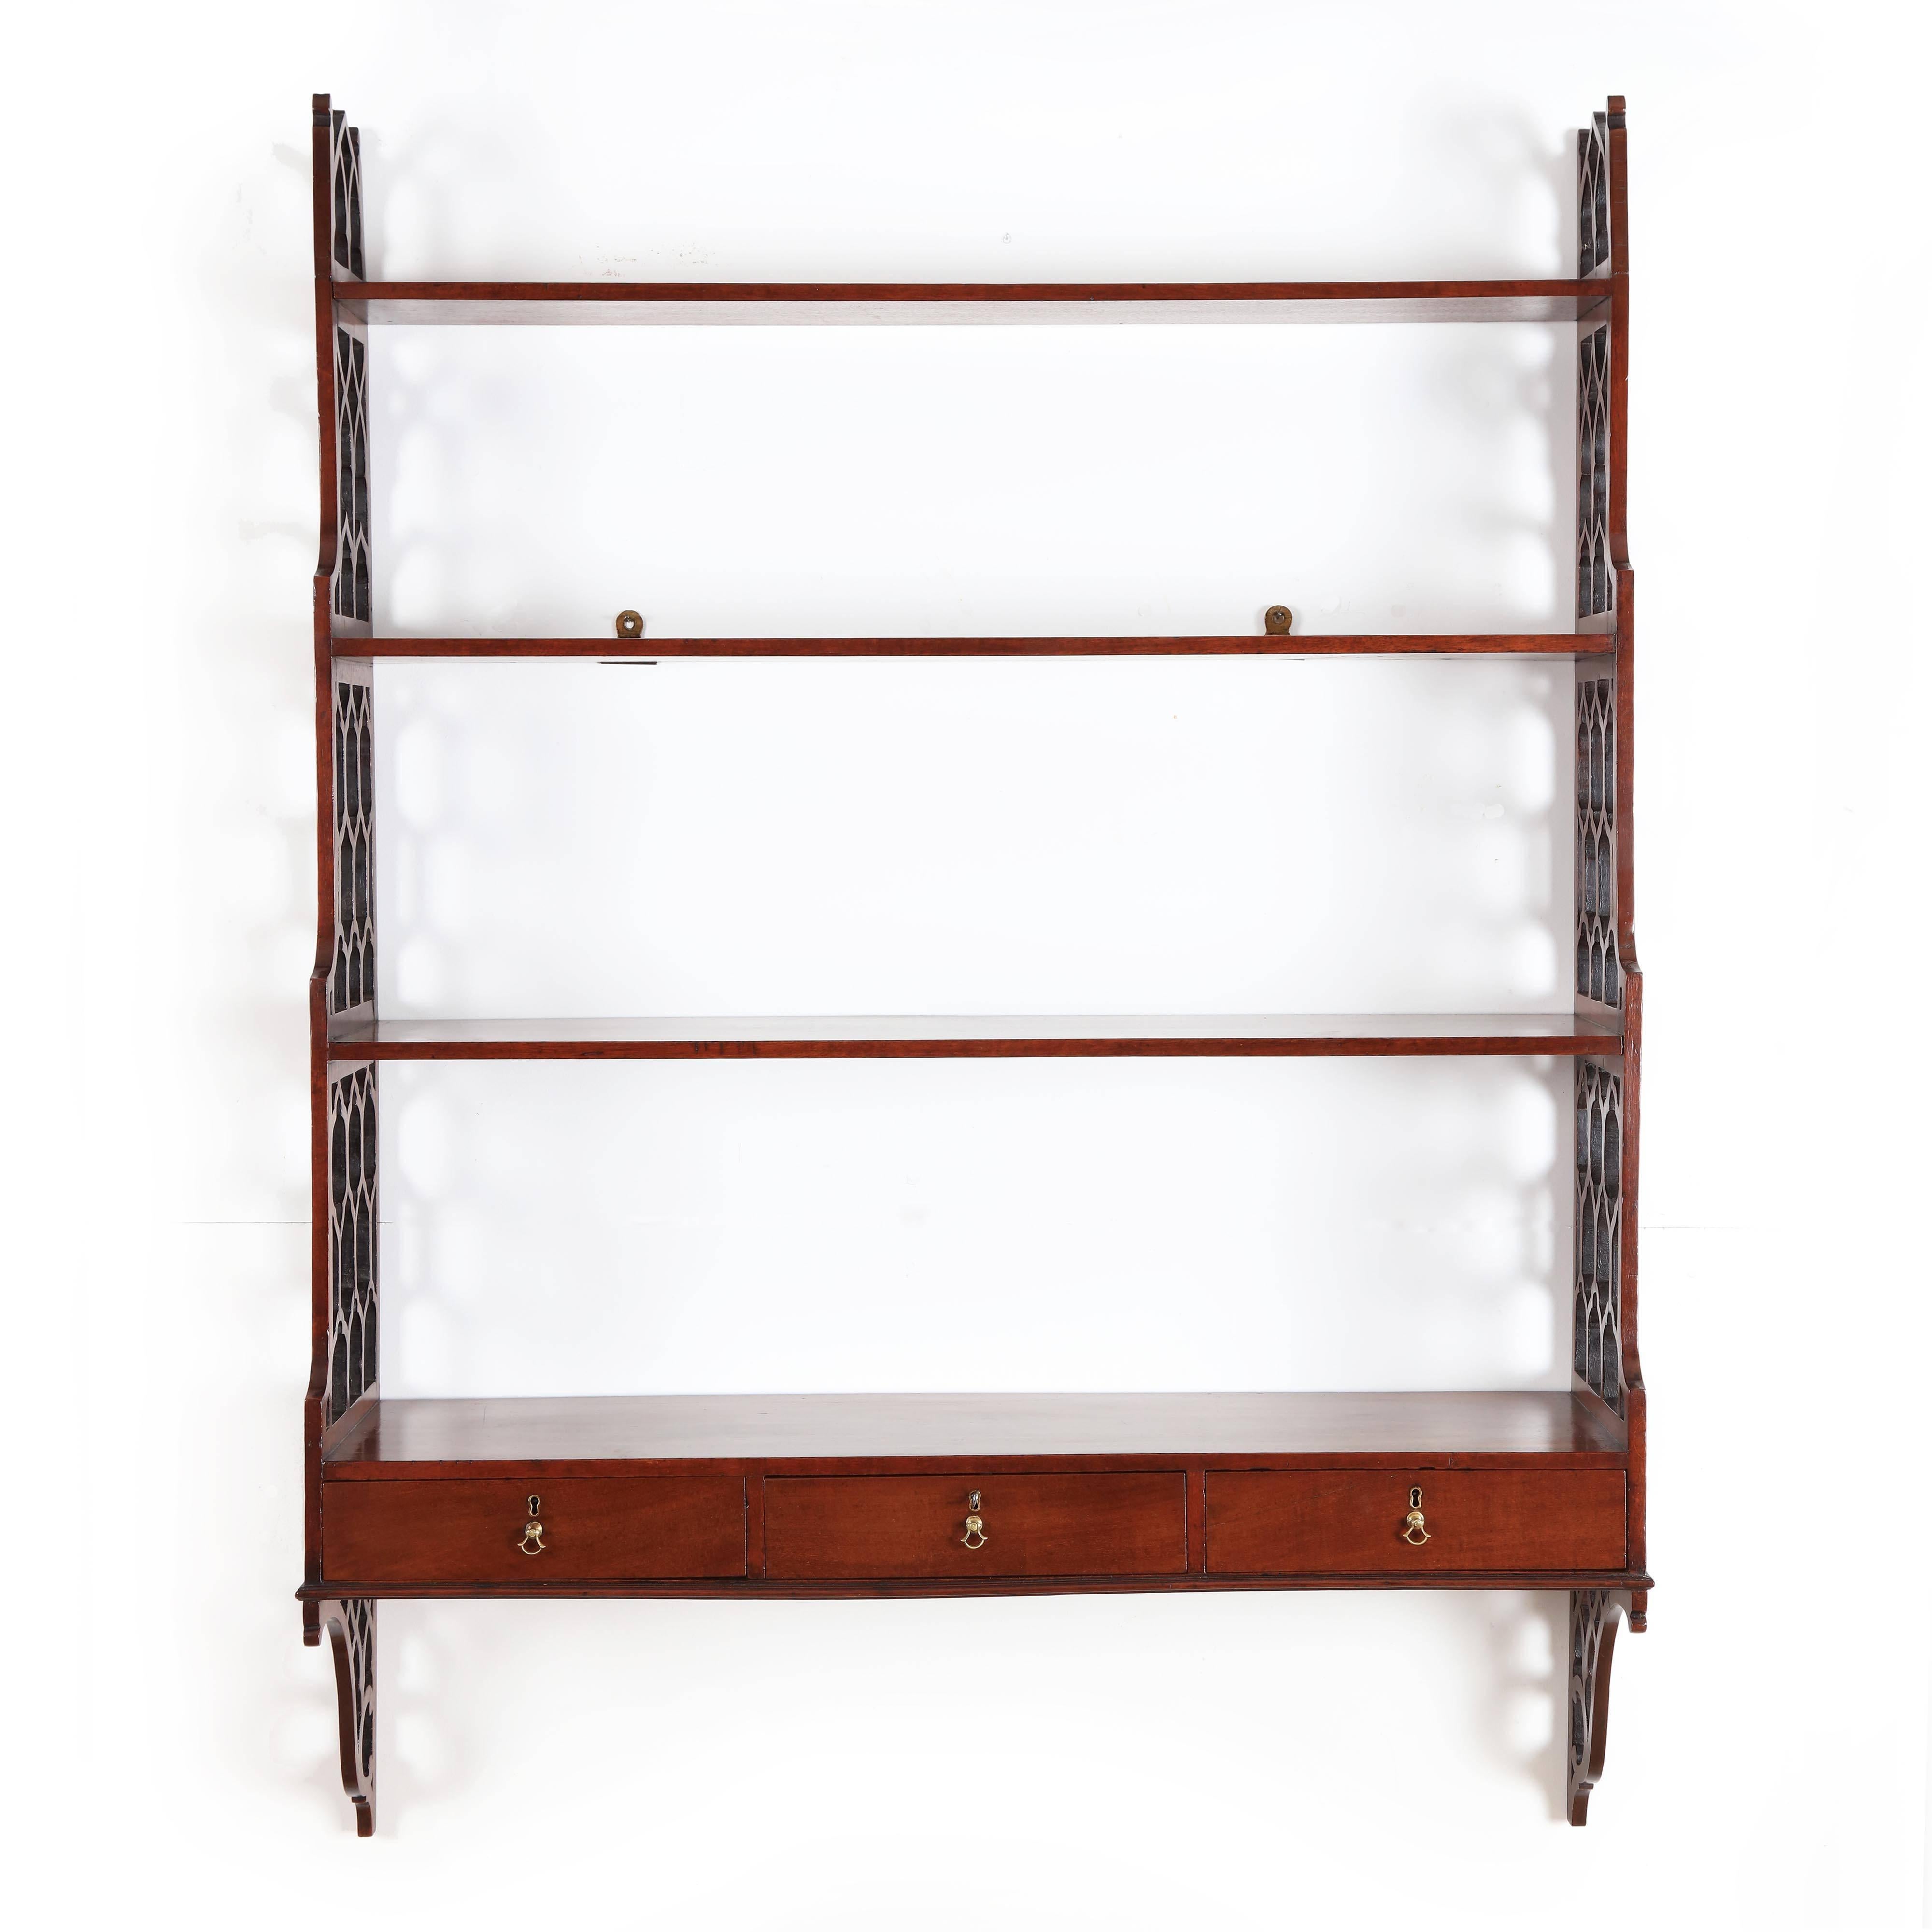 An important set of George III Chippendale period mahogany hanging wall shelves. The pierced fretwork fashioned sides in the Chinese Chippendale taste. The sides are joined by three horizontal shelves and an integrated bottom frieze section with a